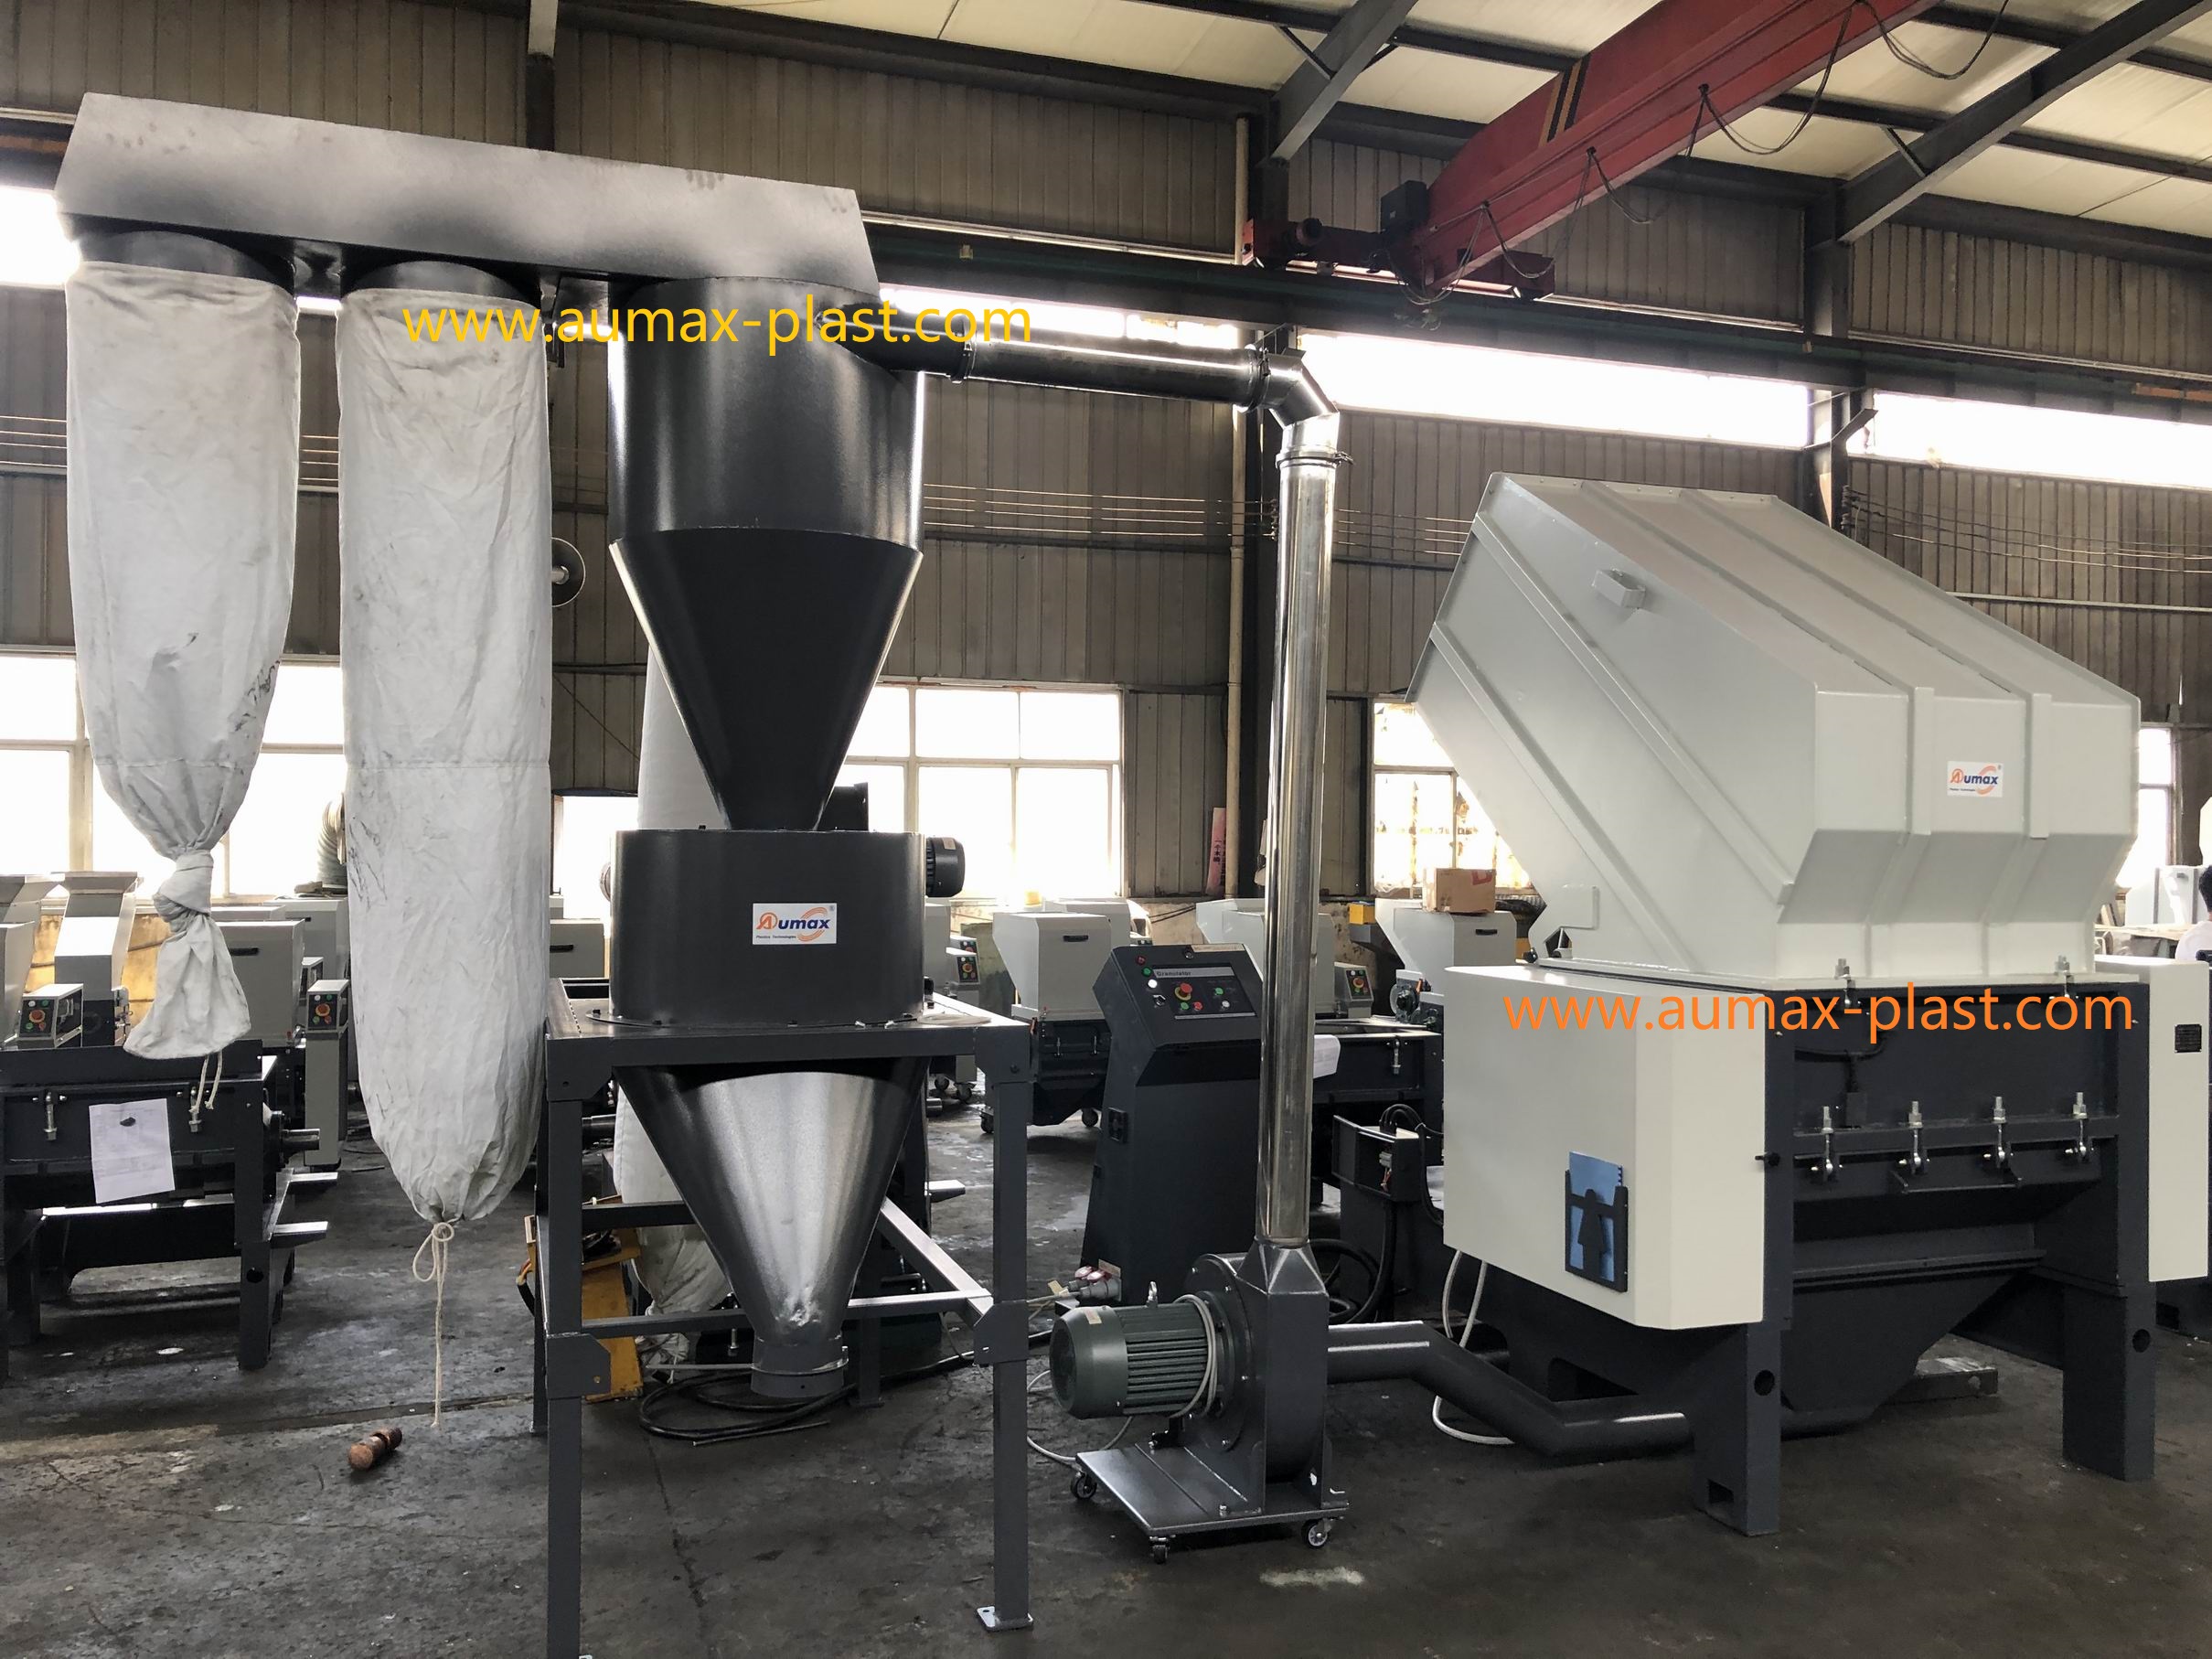 Why the Granulated Plastic is Difficult to Discharge from Plastic Crusher?cid=191